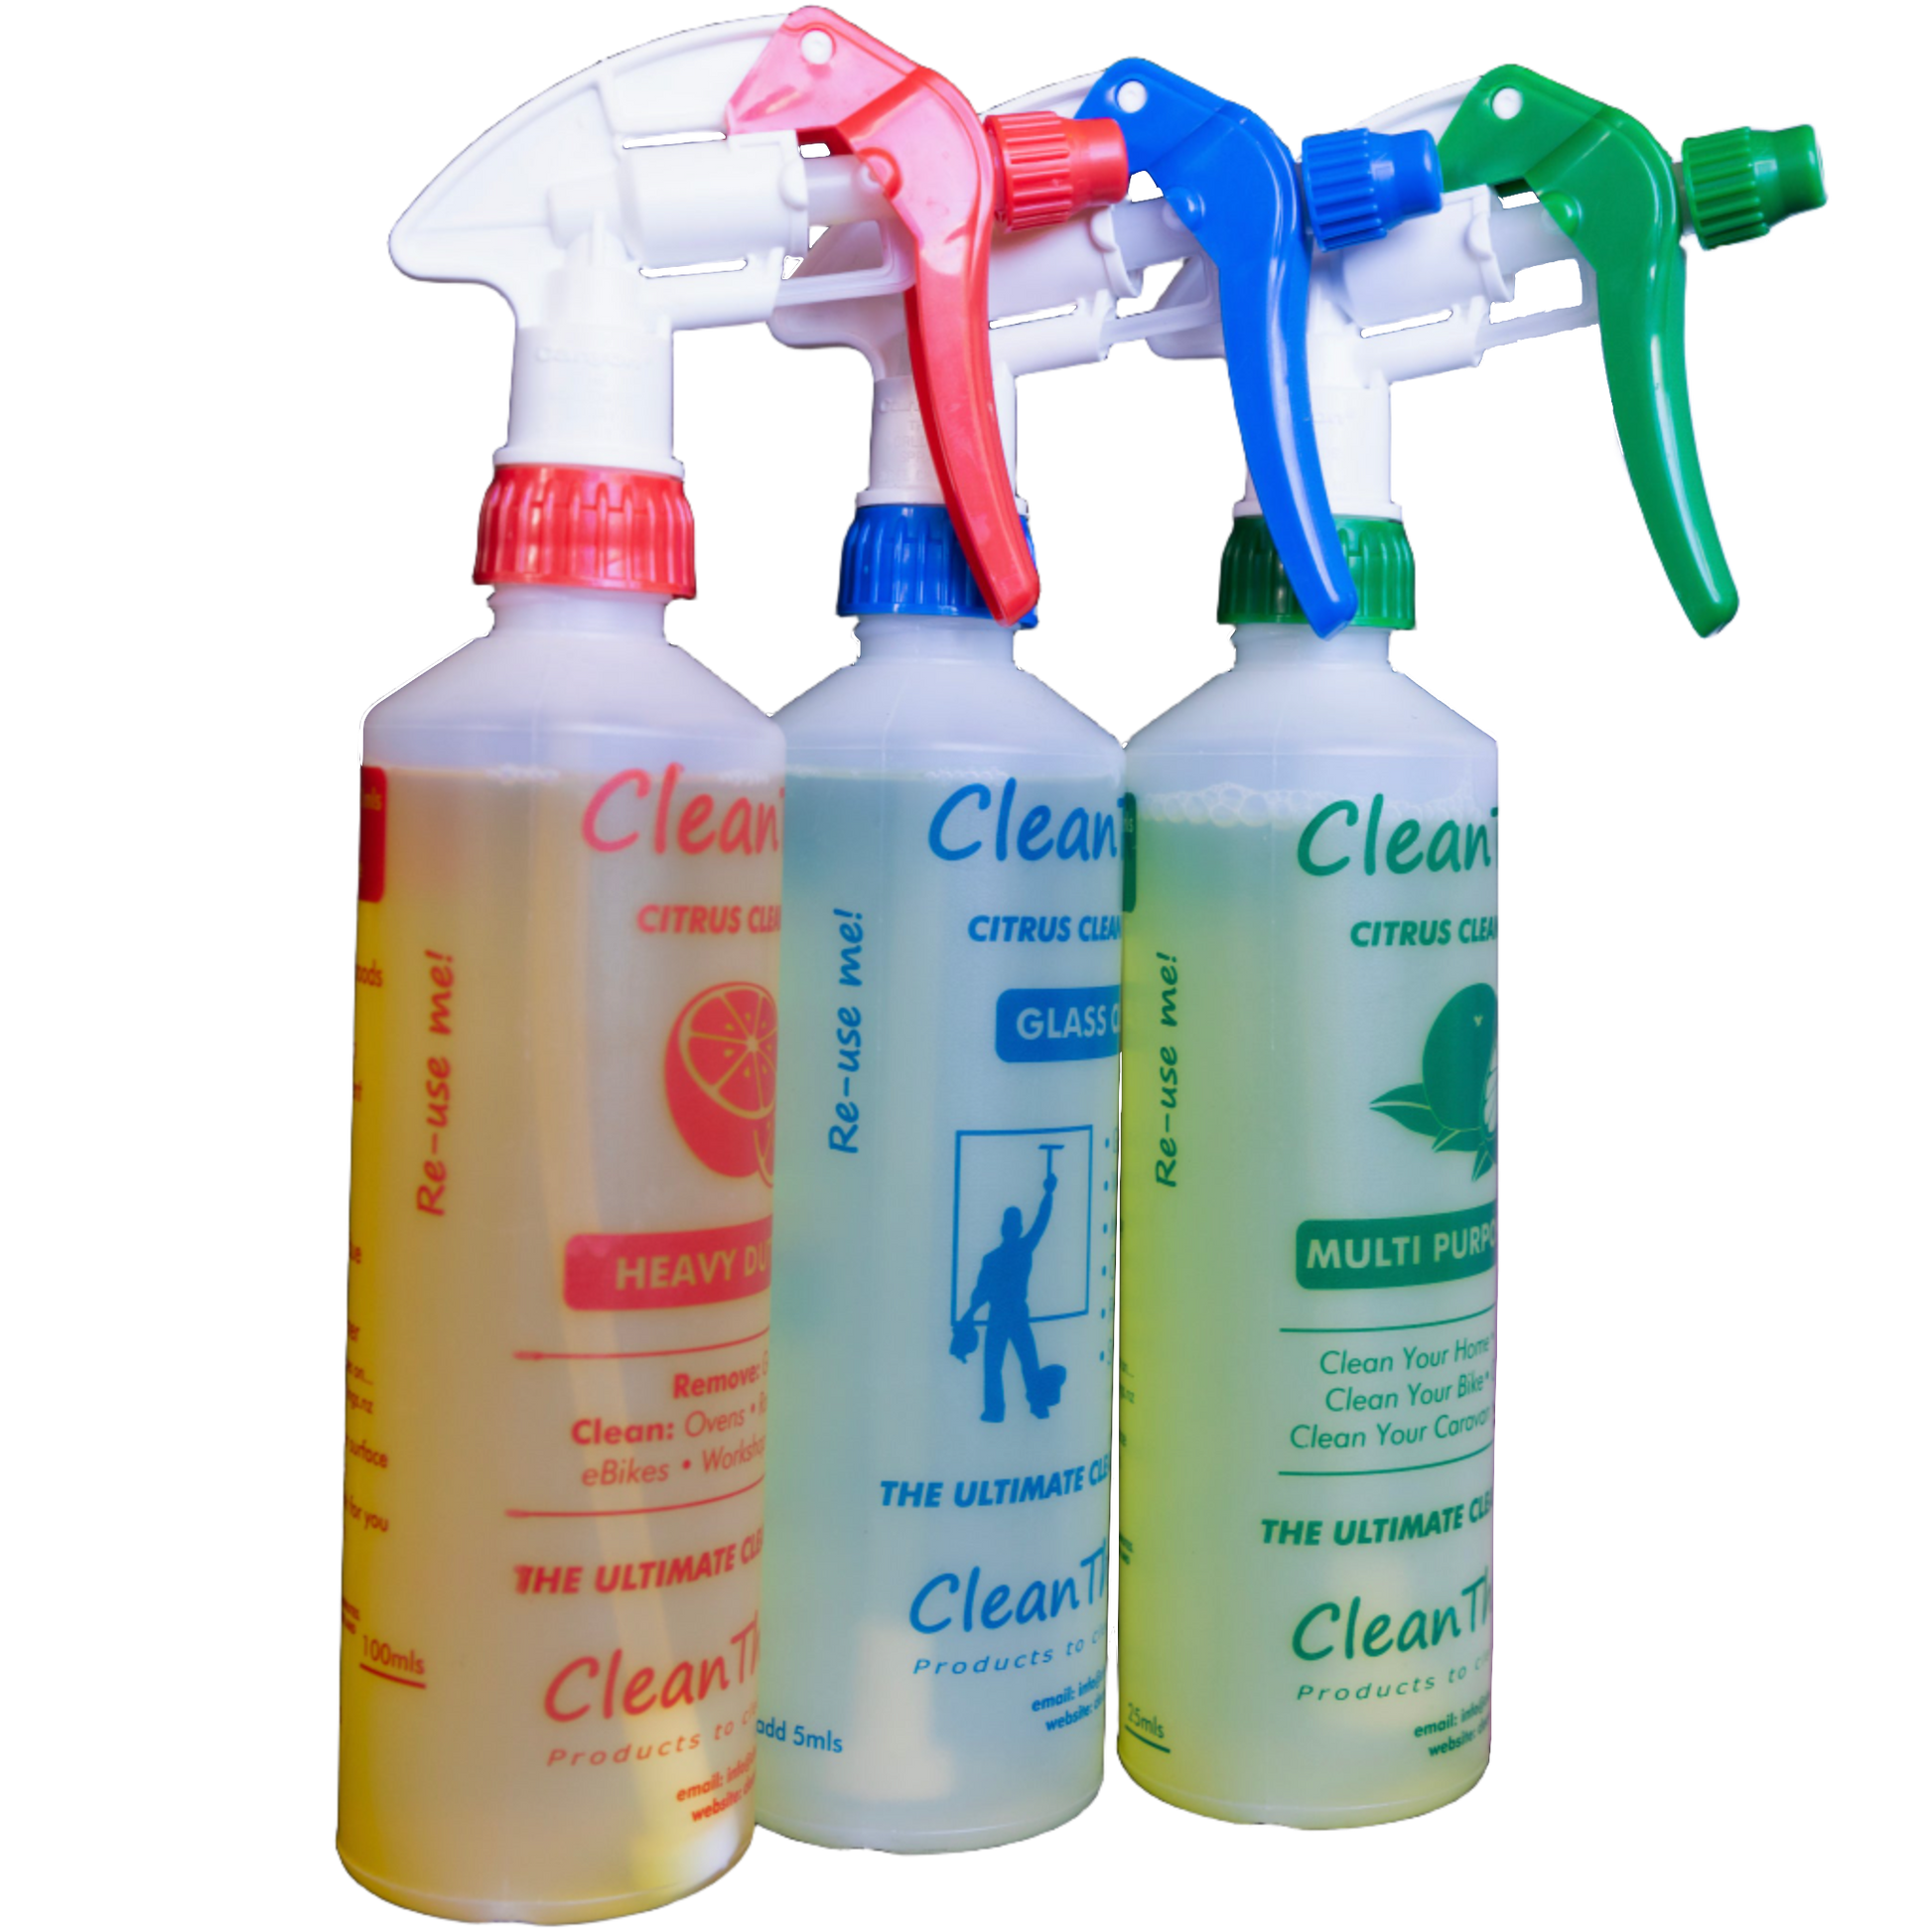 3 Citrus Cleaner Spray Bottles ready2use 500ml Red Heavy Duty Cleaner Blue Glass Cleaner Green MultiPurpose Cleaner Re-Use Me